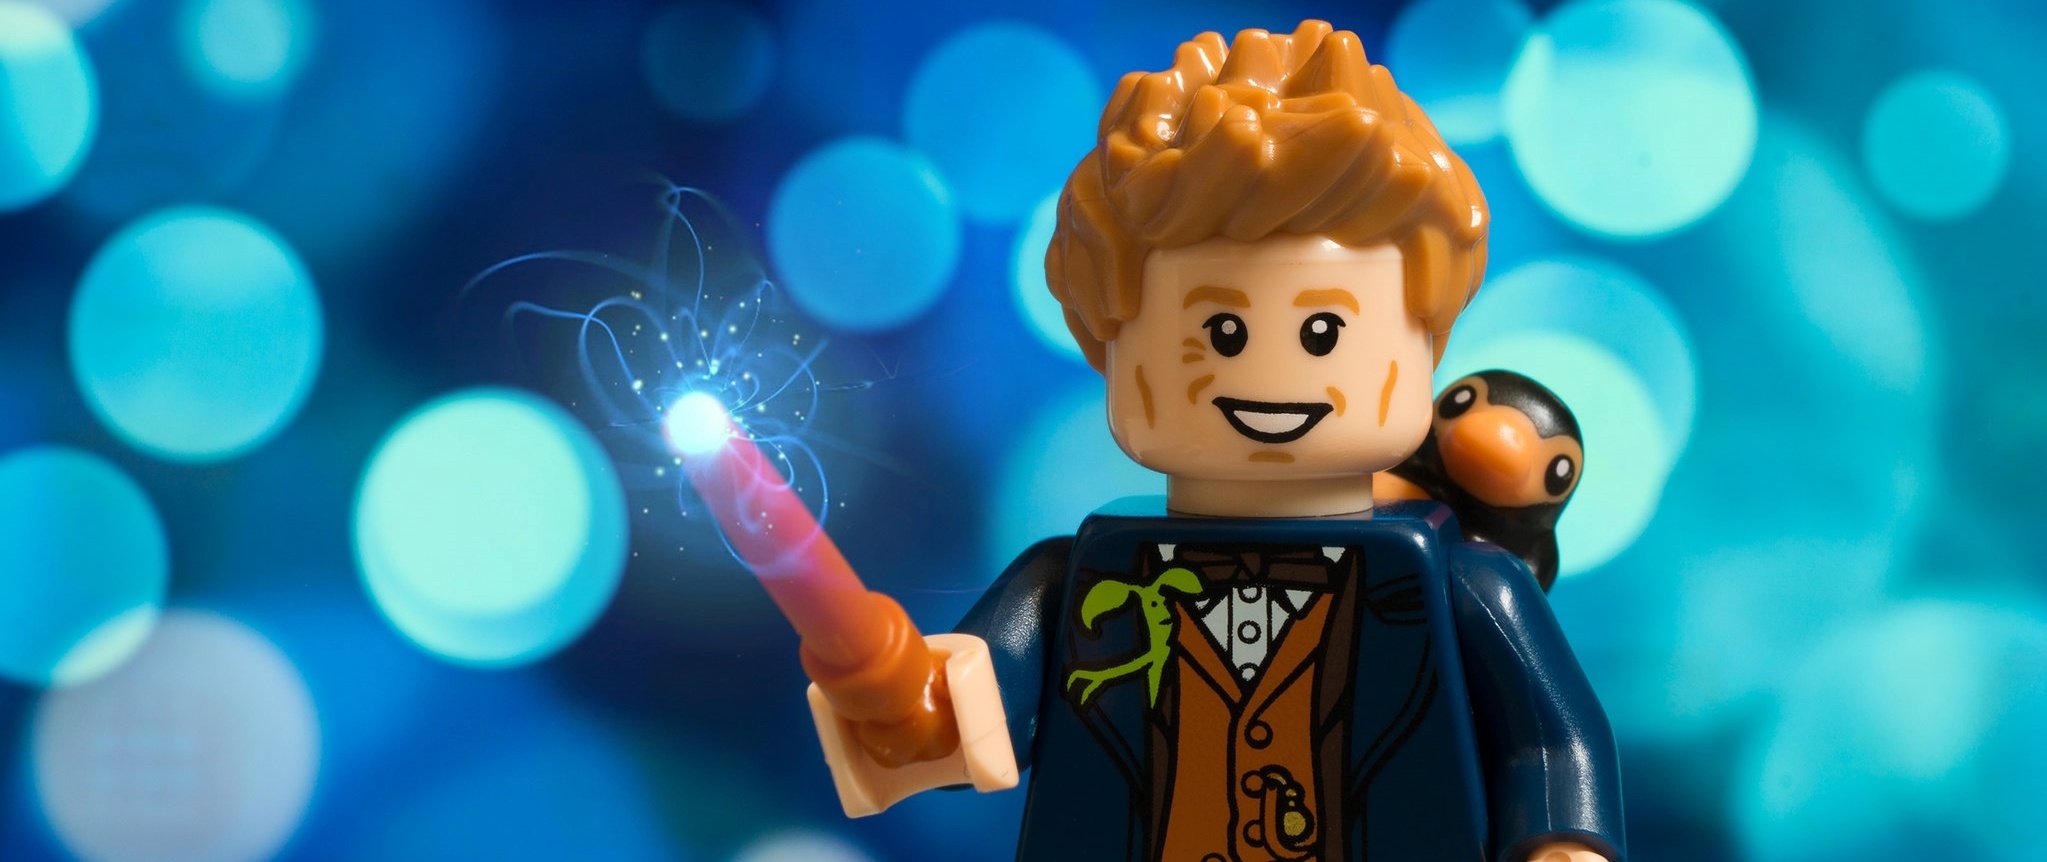 lego wizard - The 8 Best at Home Workouts (No-Equipment!)